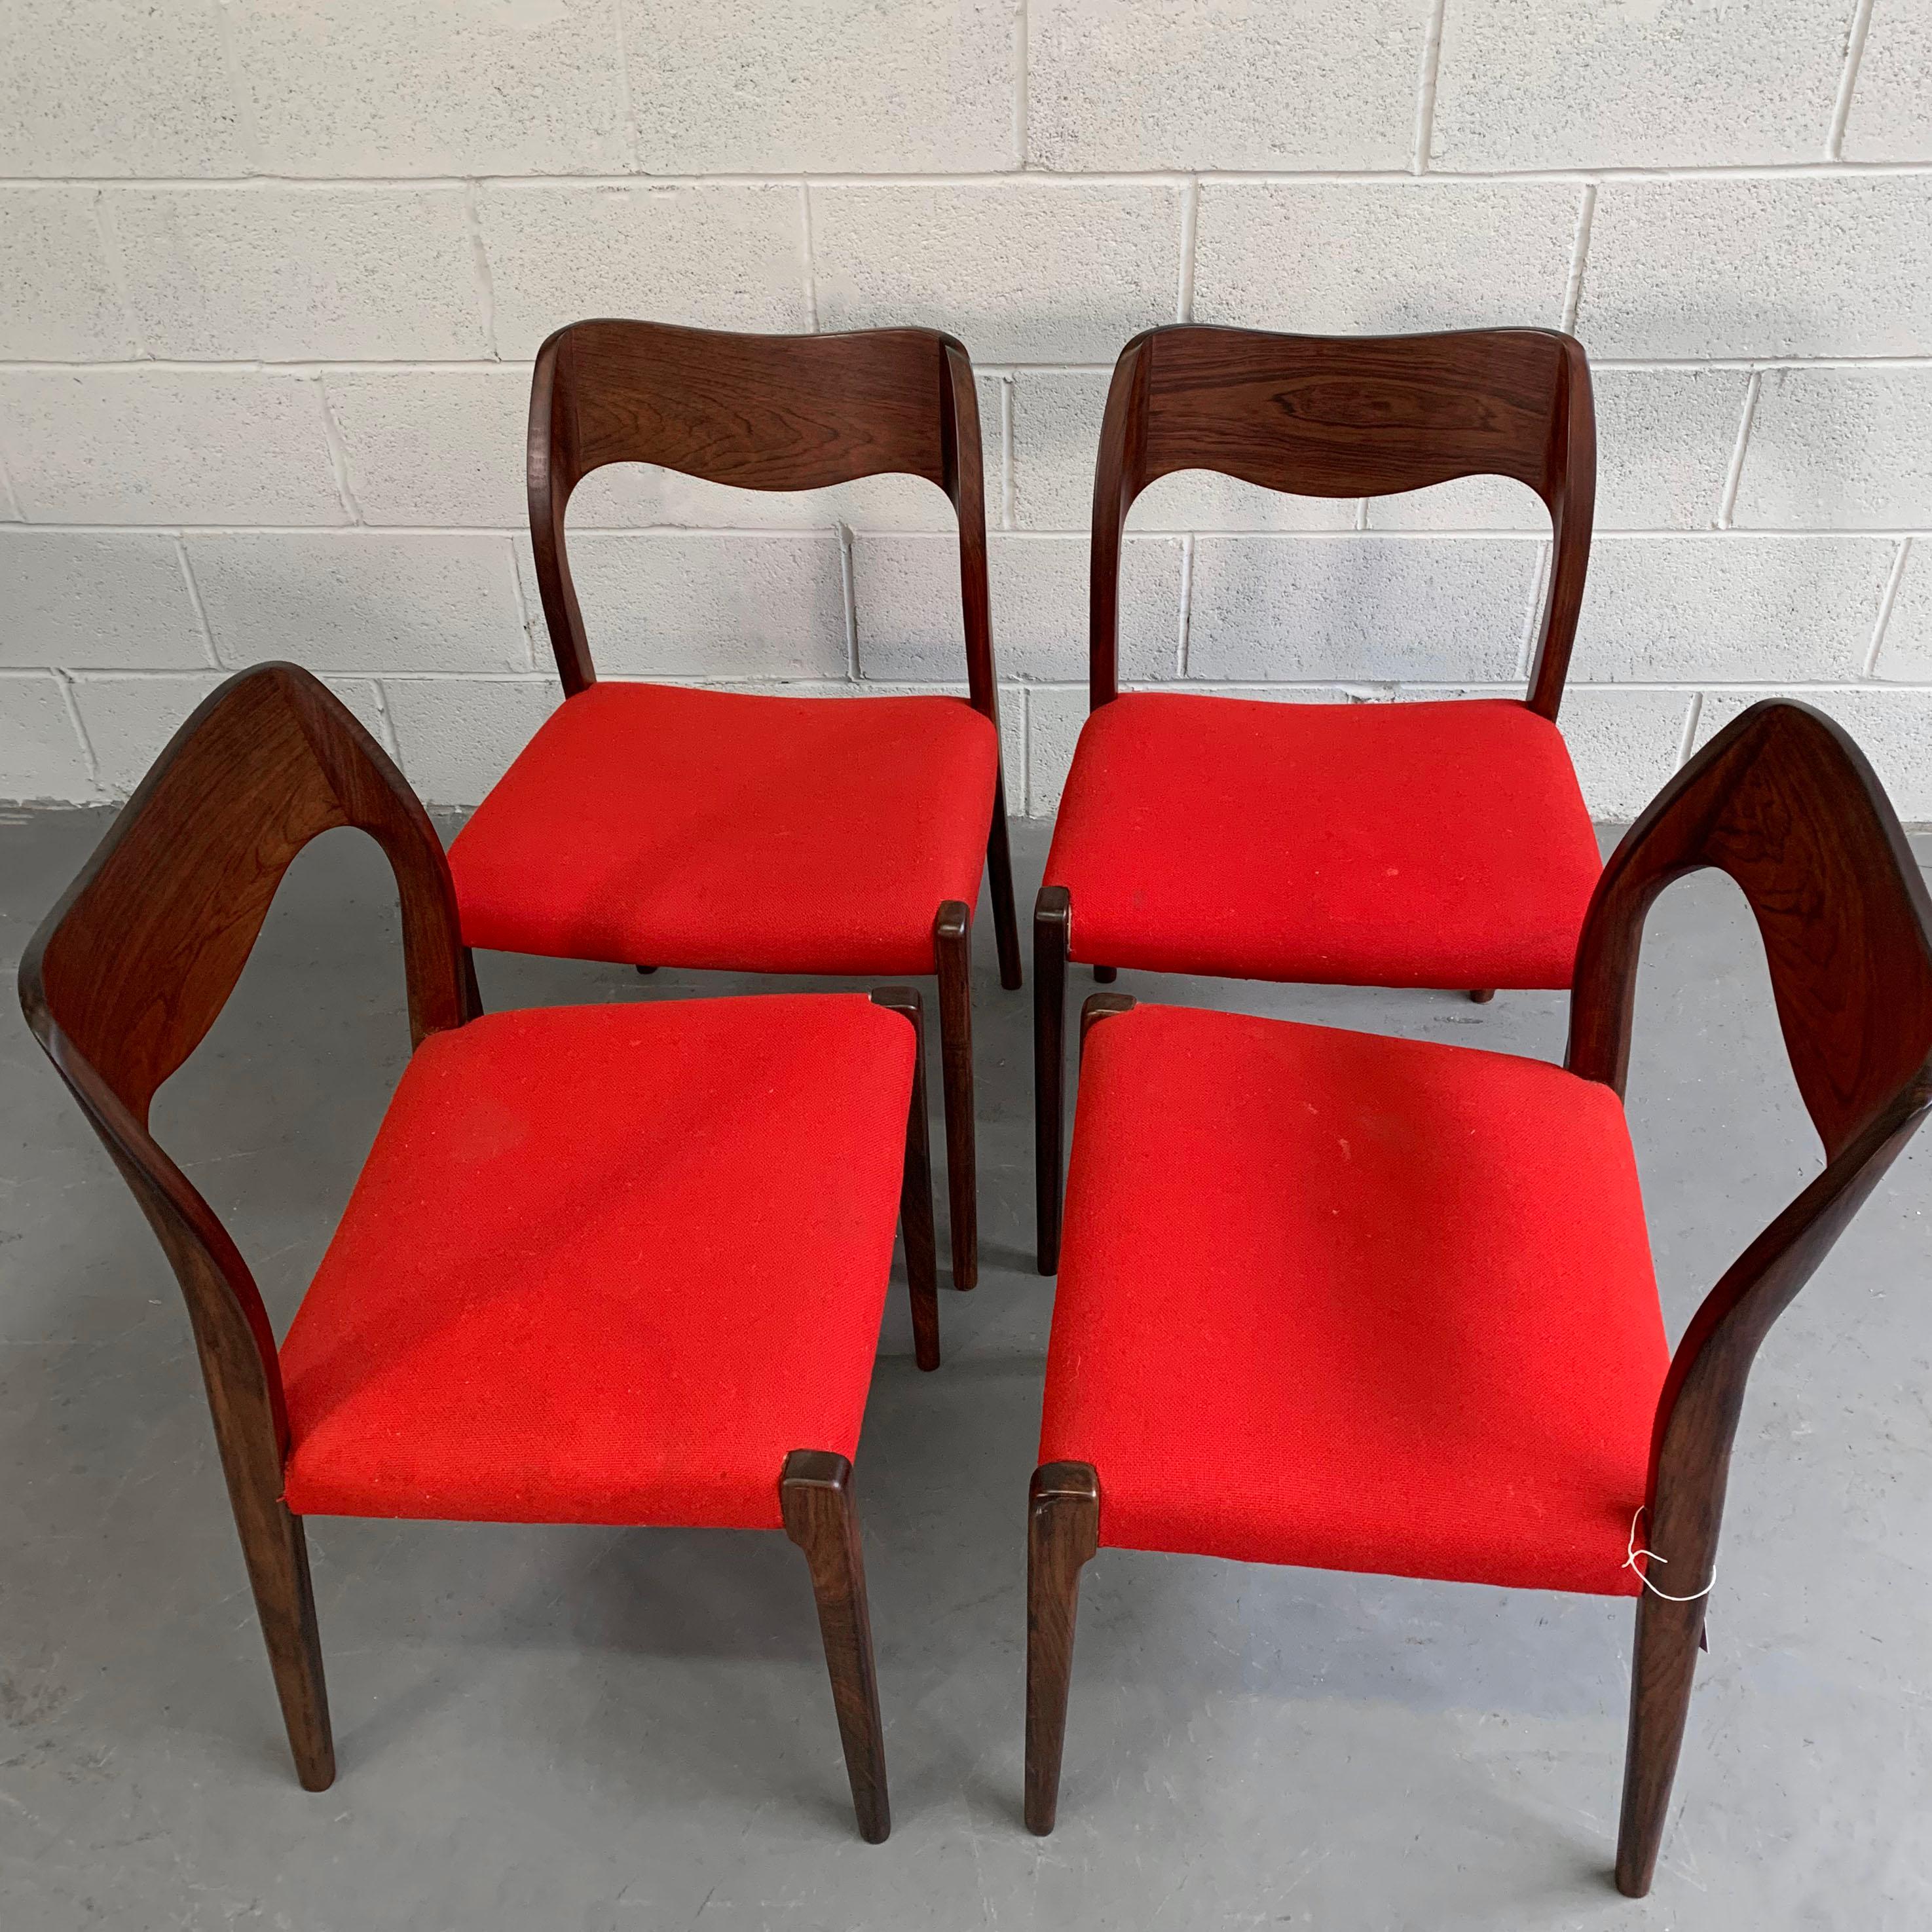 Danish Modern Rosewood Dining Chairs by Niels Moller 1